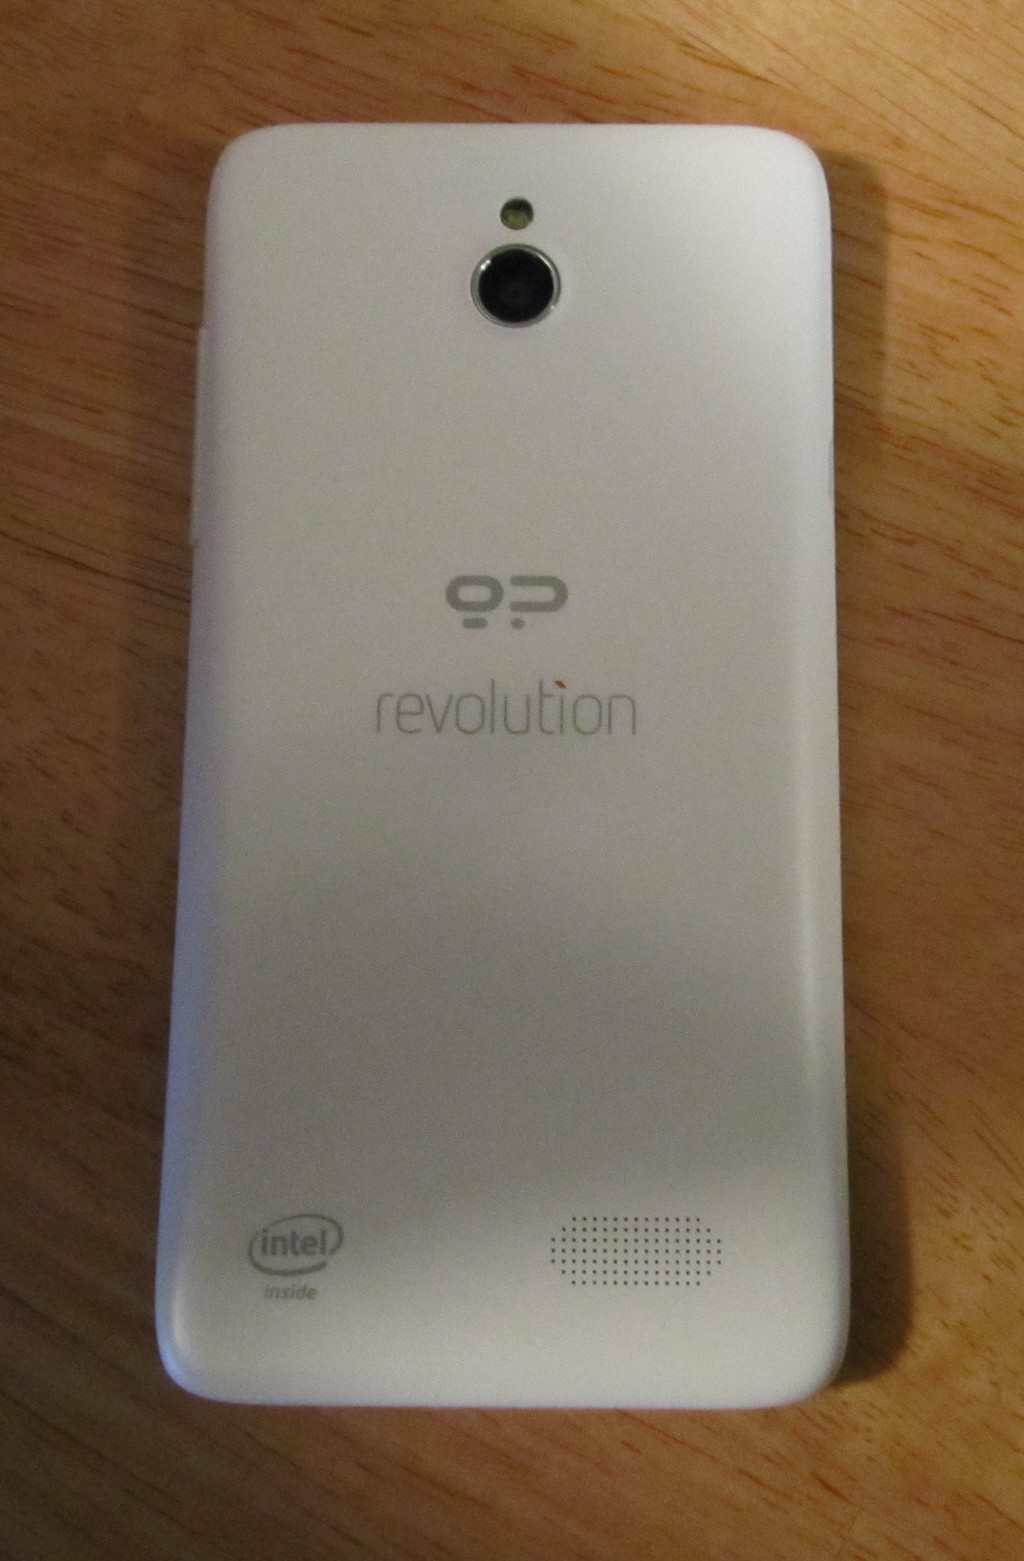 The back of the Geeksphone Revolution